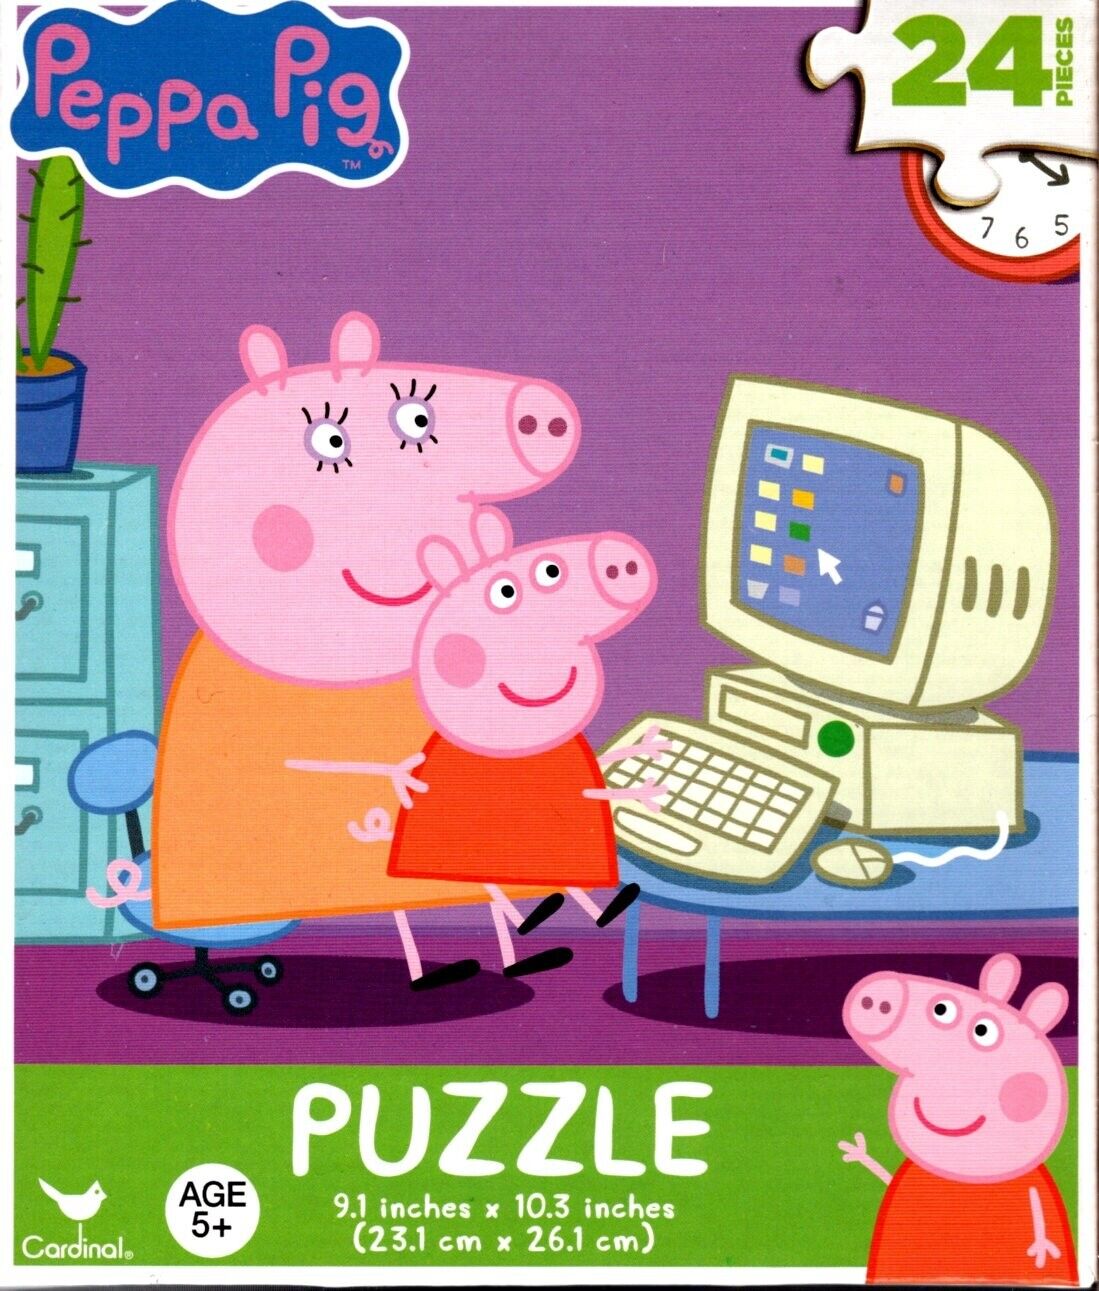 Peppa Pig - 24 Pieces Jigsaw Puzzle Set of 3